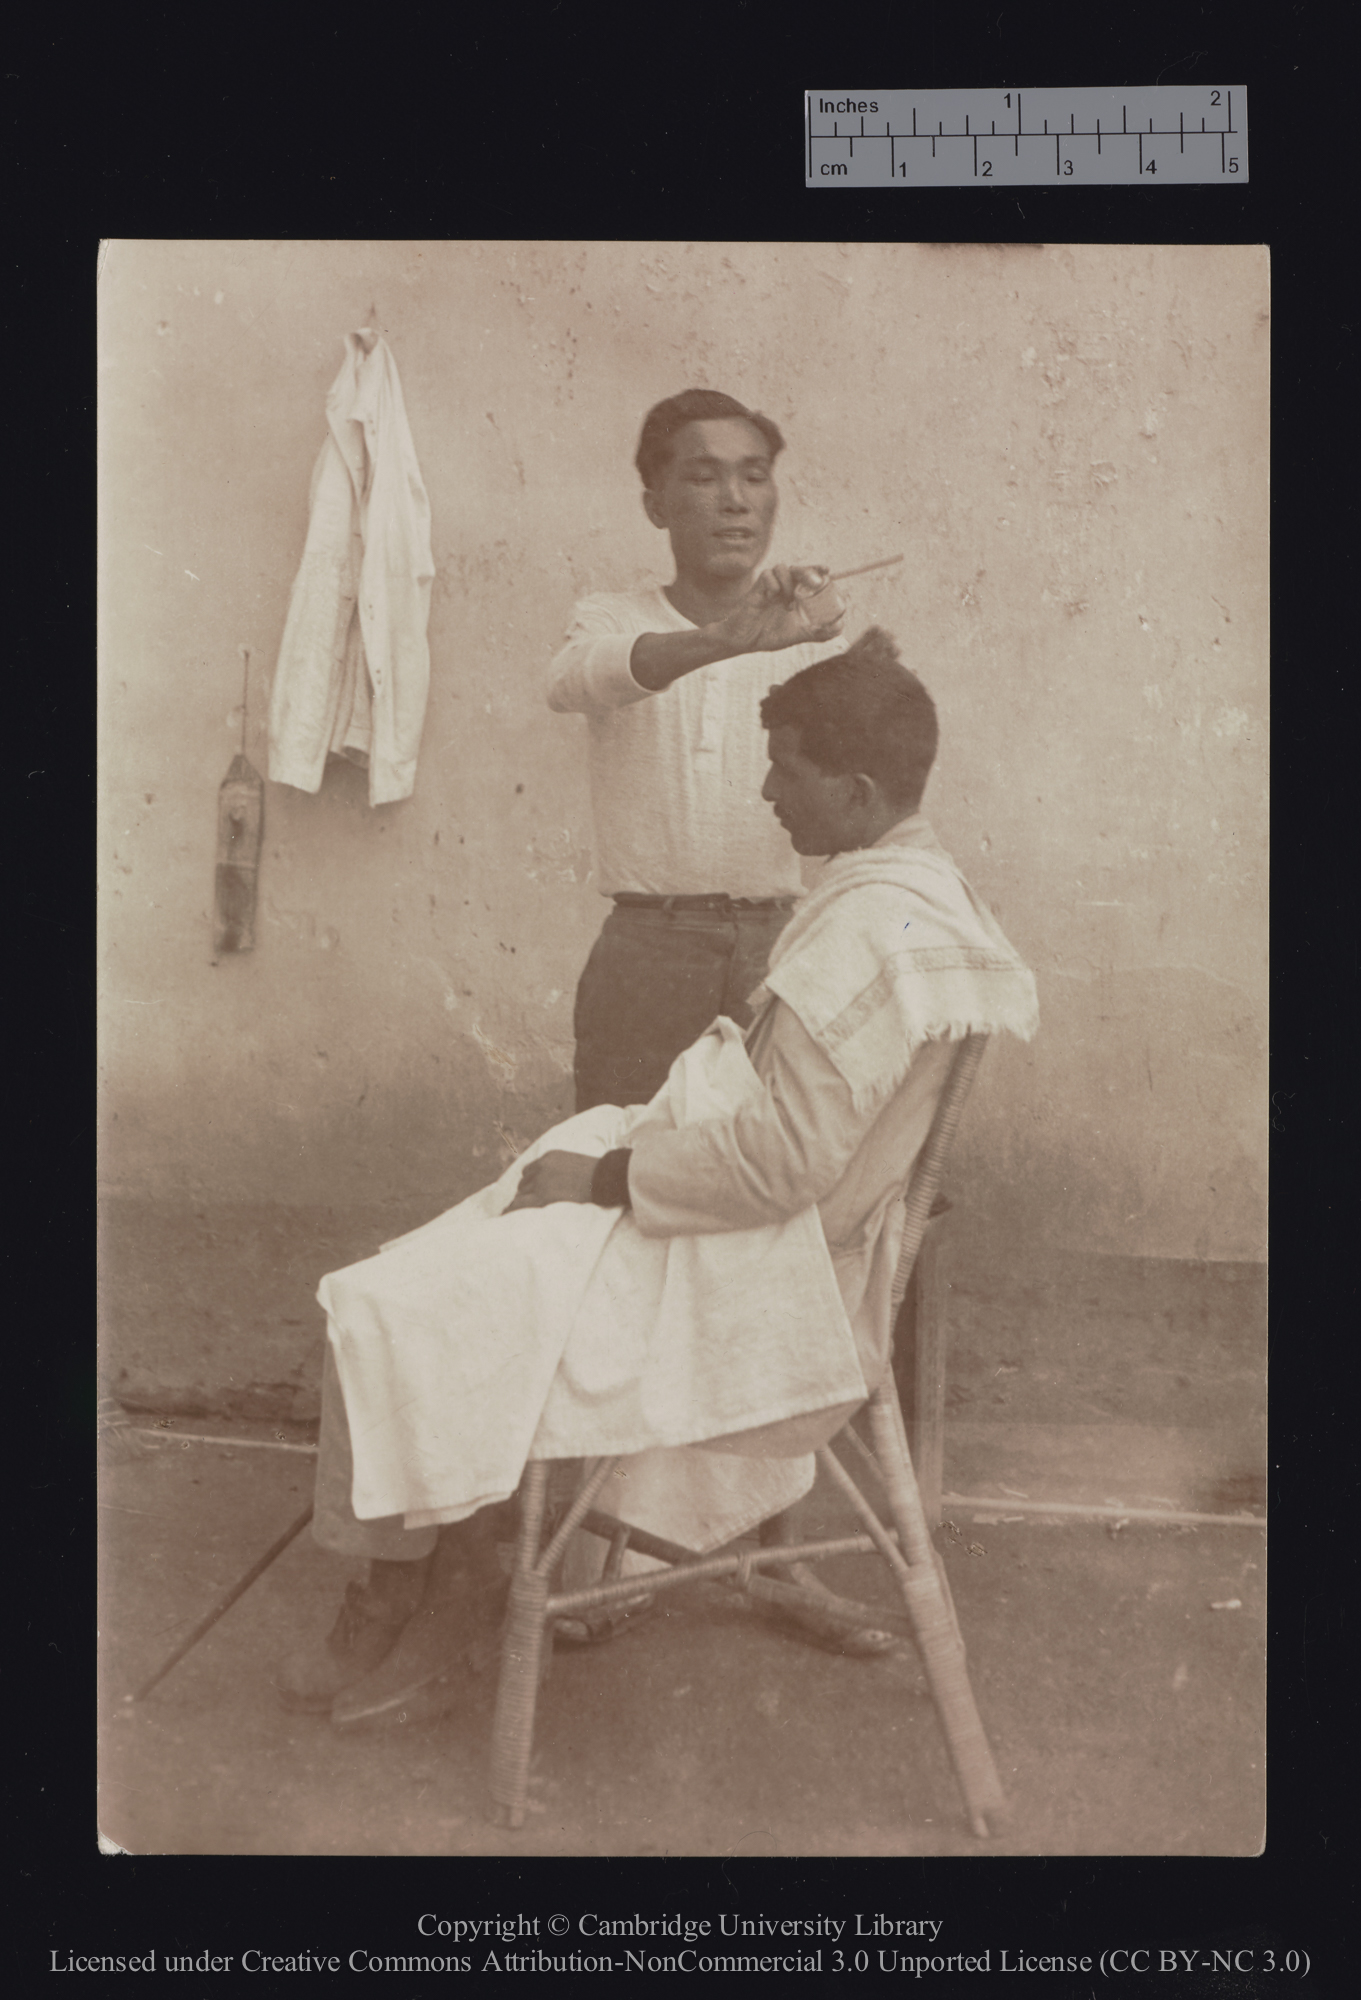 The barber, 1910 - 1929